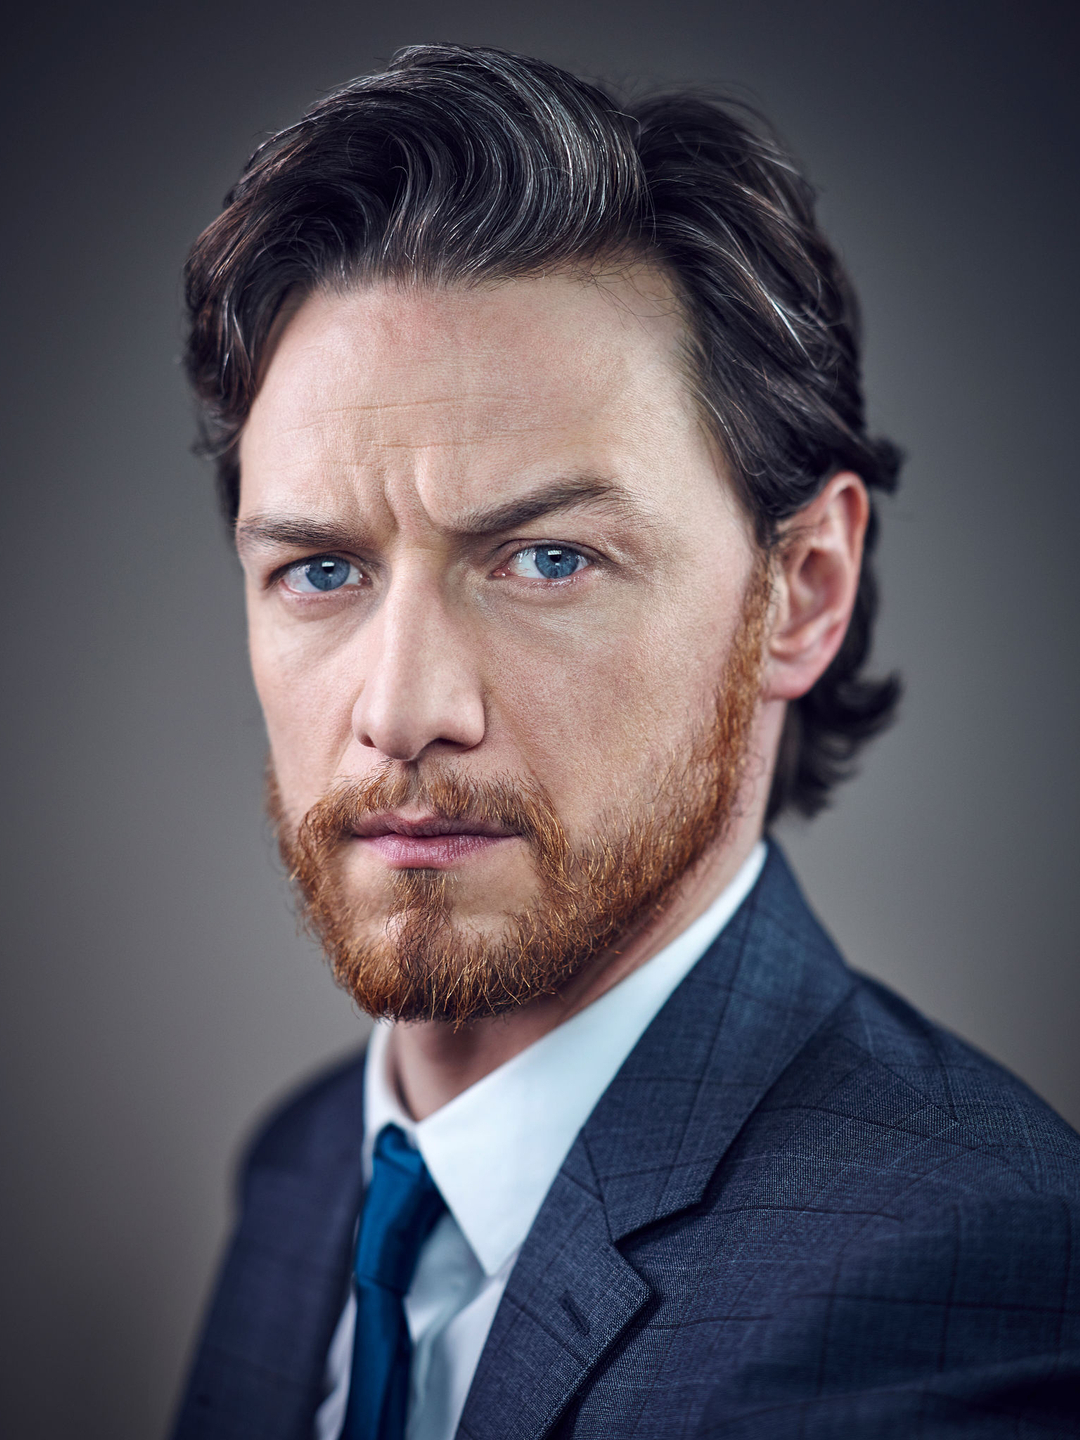 James McAvoy where did he study